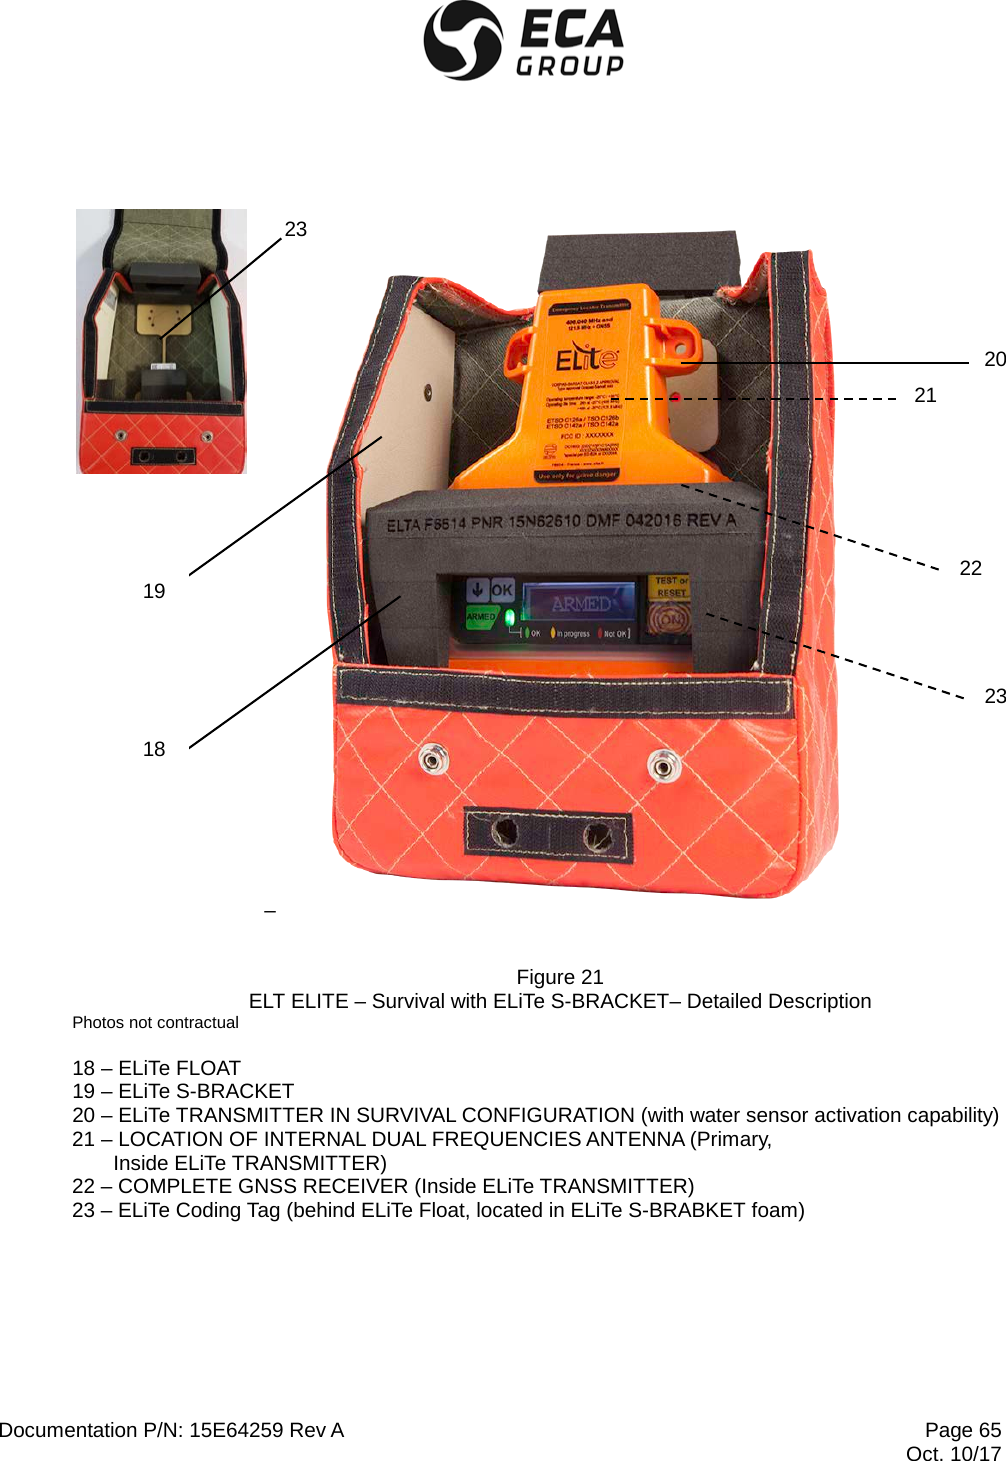  Documentation P/N: 15E64259 Rev A Page 65  Oct. 10/17 –     Figure 21 ELT ELITE – Survival with ELiTe S-BRACKET– Detailed Description Photos not contractual  18 – ELiTe FLOAT 19 – ELiTe S-BRACKET 20 – ELiTe TRANSMITTER IN SURVIVAL CONFIGURATION (with water sensor activation capability) 21 – LOCATION OF INTERNAL DUAL FREQUENCIES ANTENNA (Primary,                Inside ELiTe TRANSMITTER) 22 – COMPLETE GNSS RECEIVER (Inside ELiTe TRANSMITTER) 23 – ELiTe Coding Tag (behind ELiTe Float, located in ELiTe S-BRABKET foam) 18 19 21 22 20 23 23 